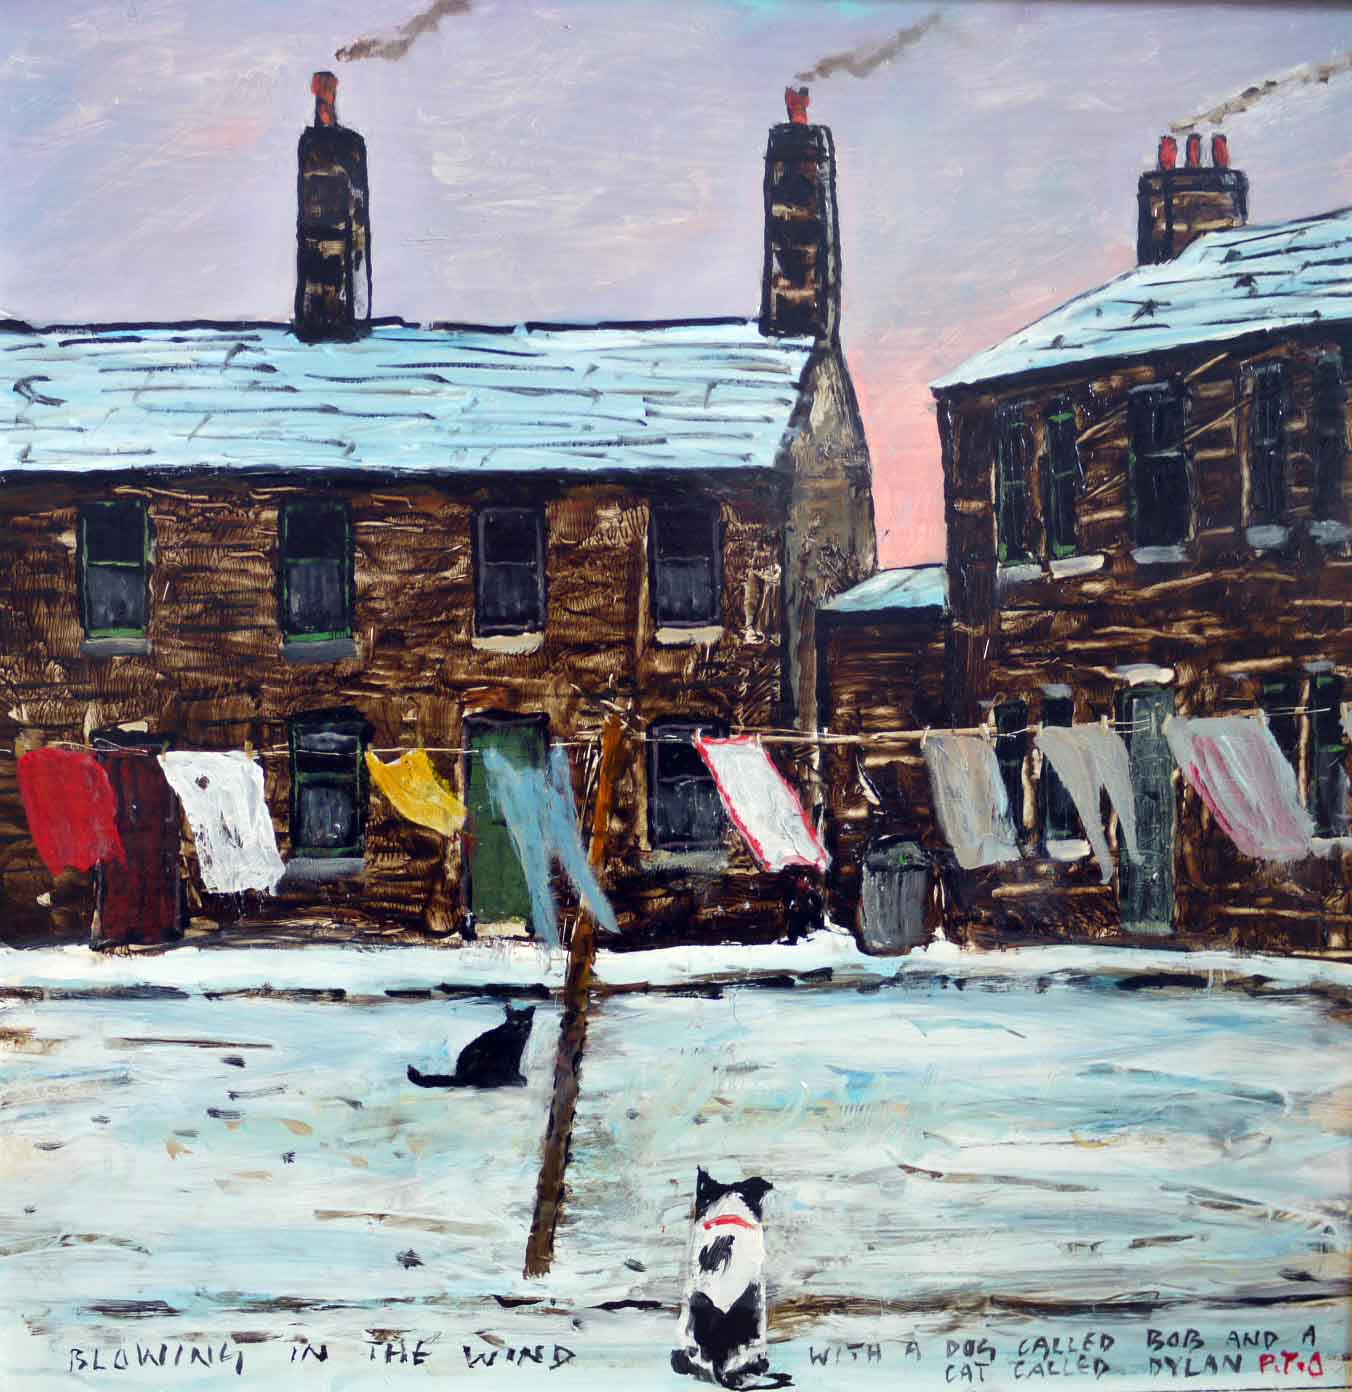 Blowing In The Wind by Peter Brook